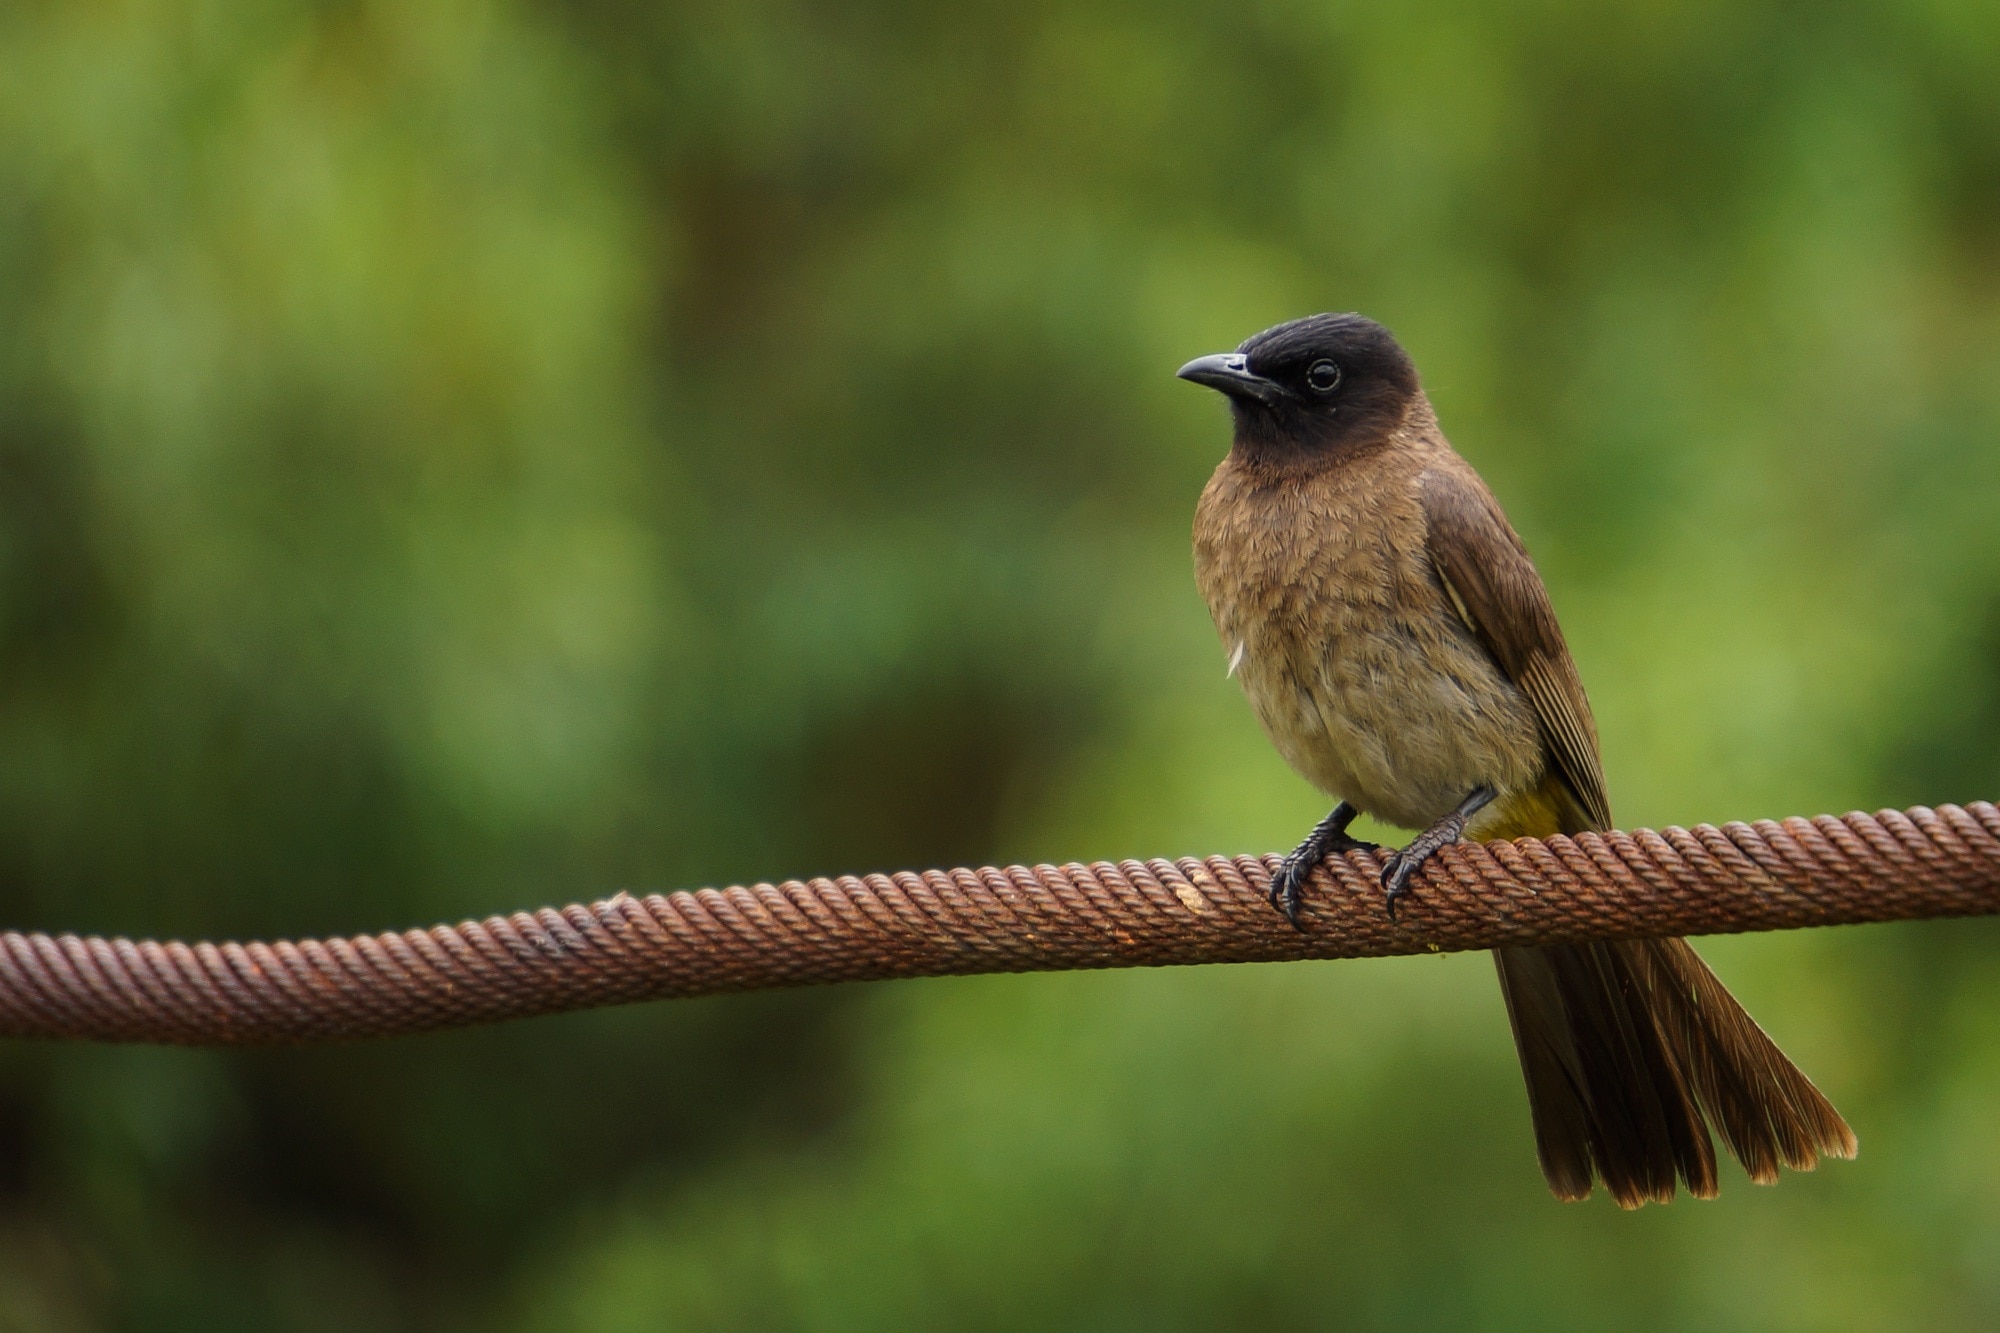 shallow photography of brown bird on brown rope during daytime